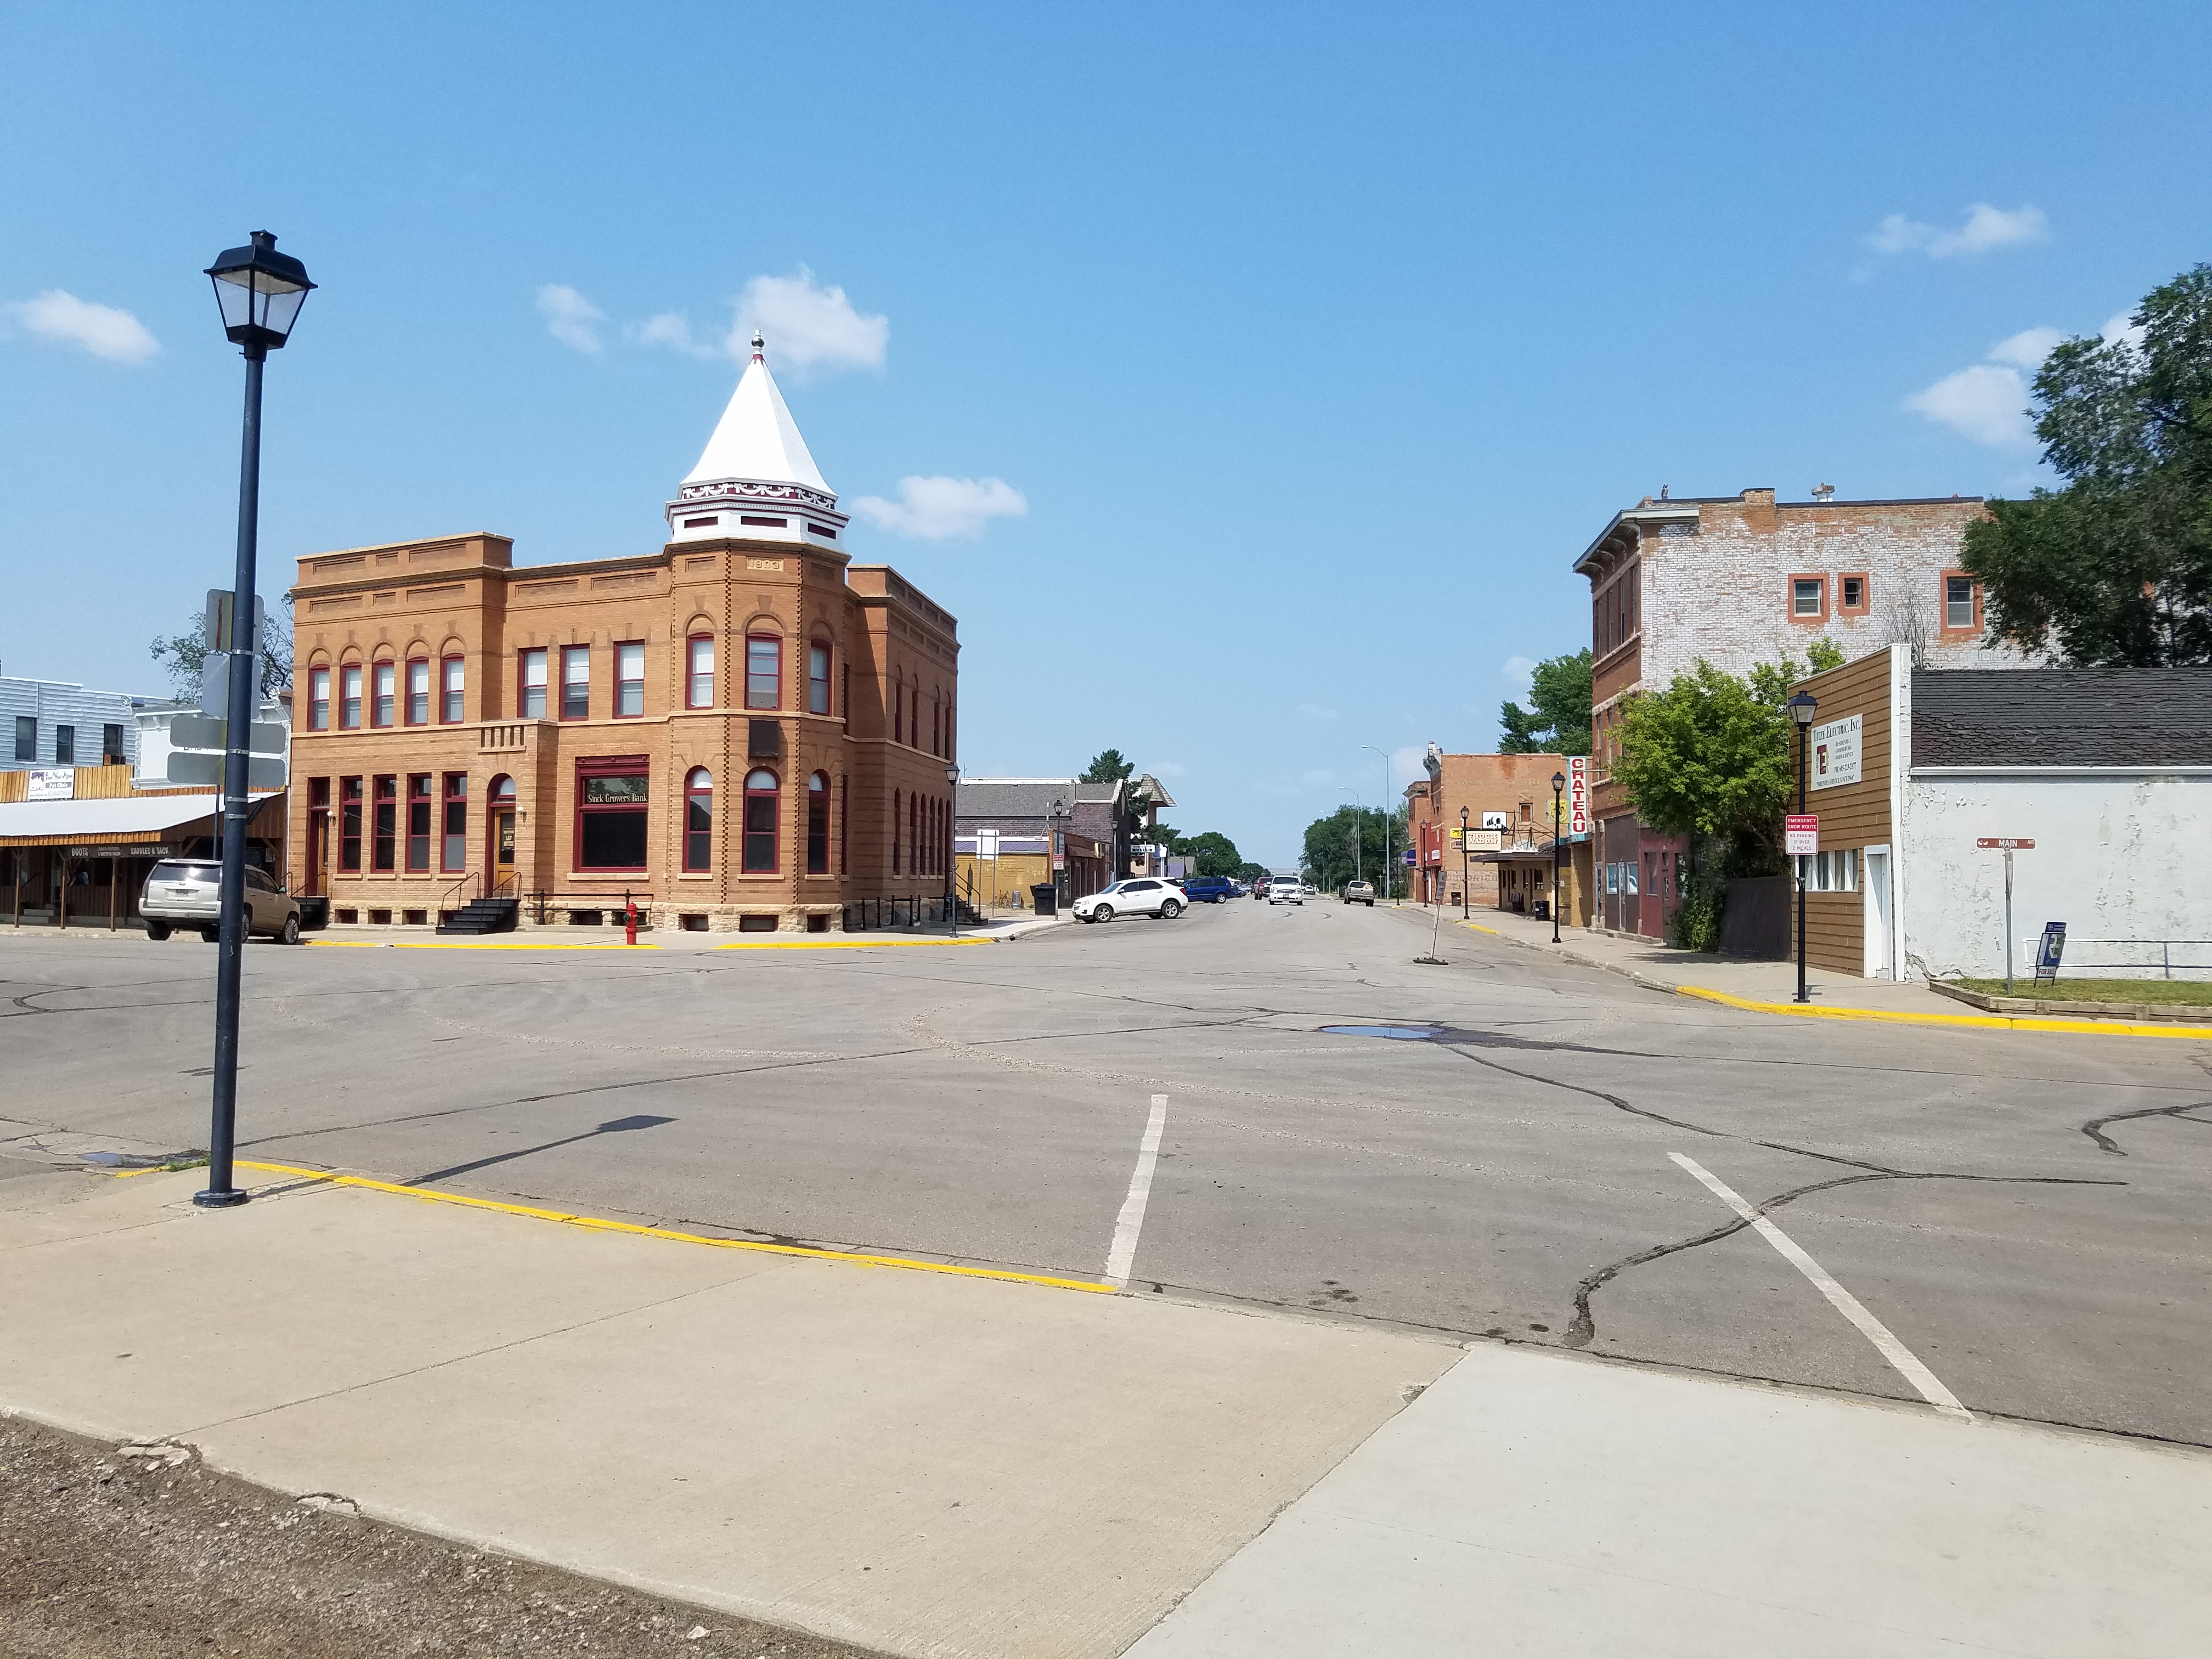 Fort Pierre City Council Working On Near Future Without Public Works Director